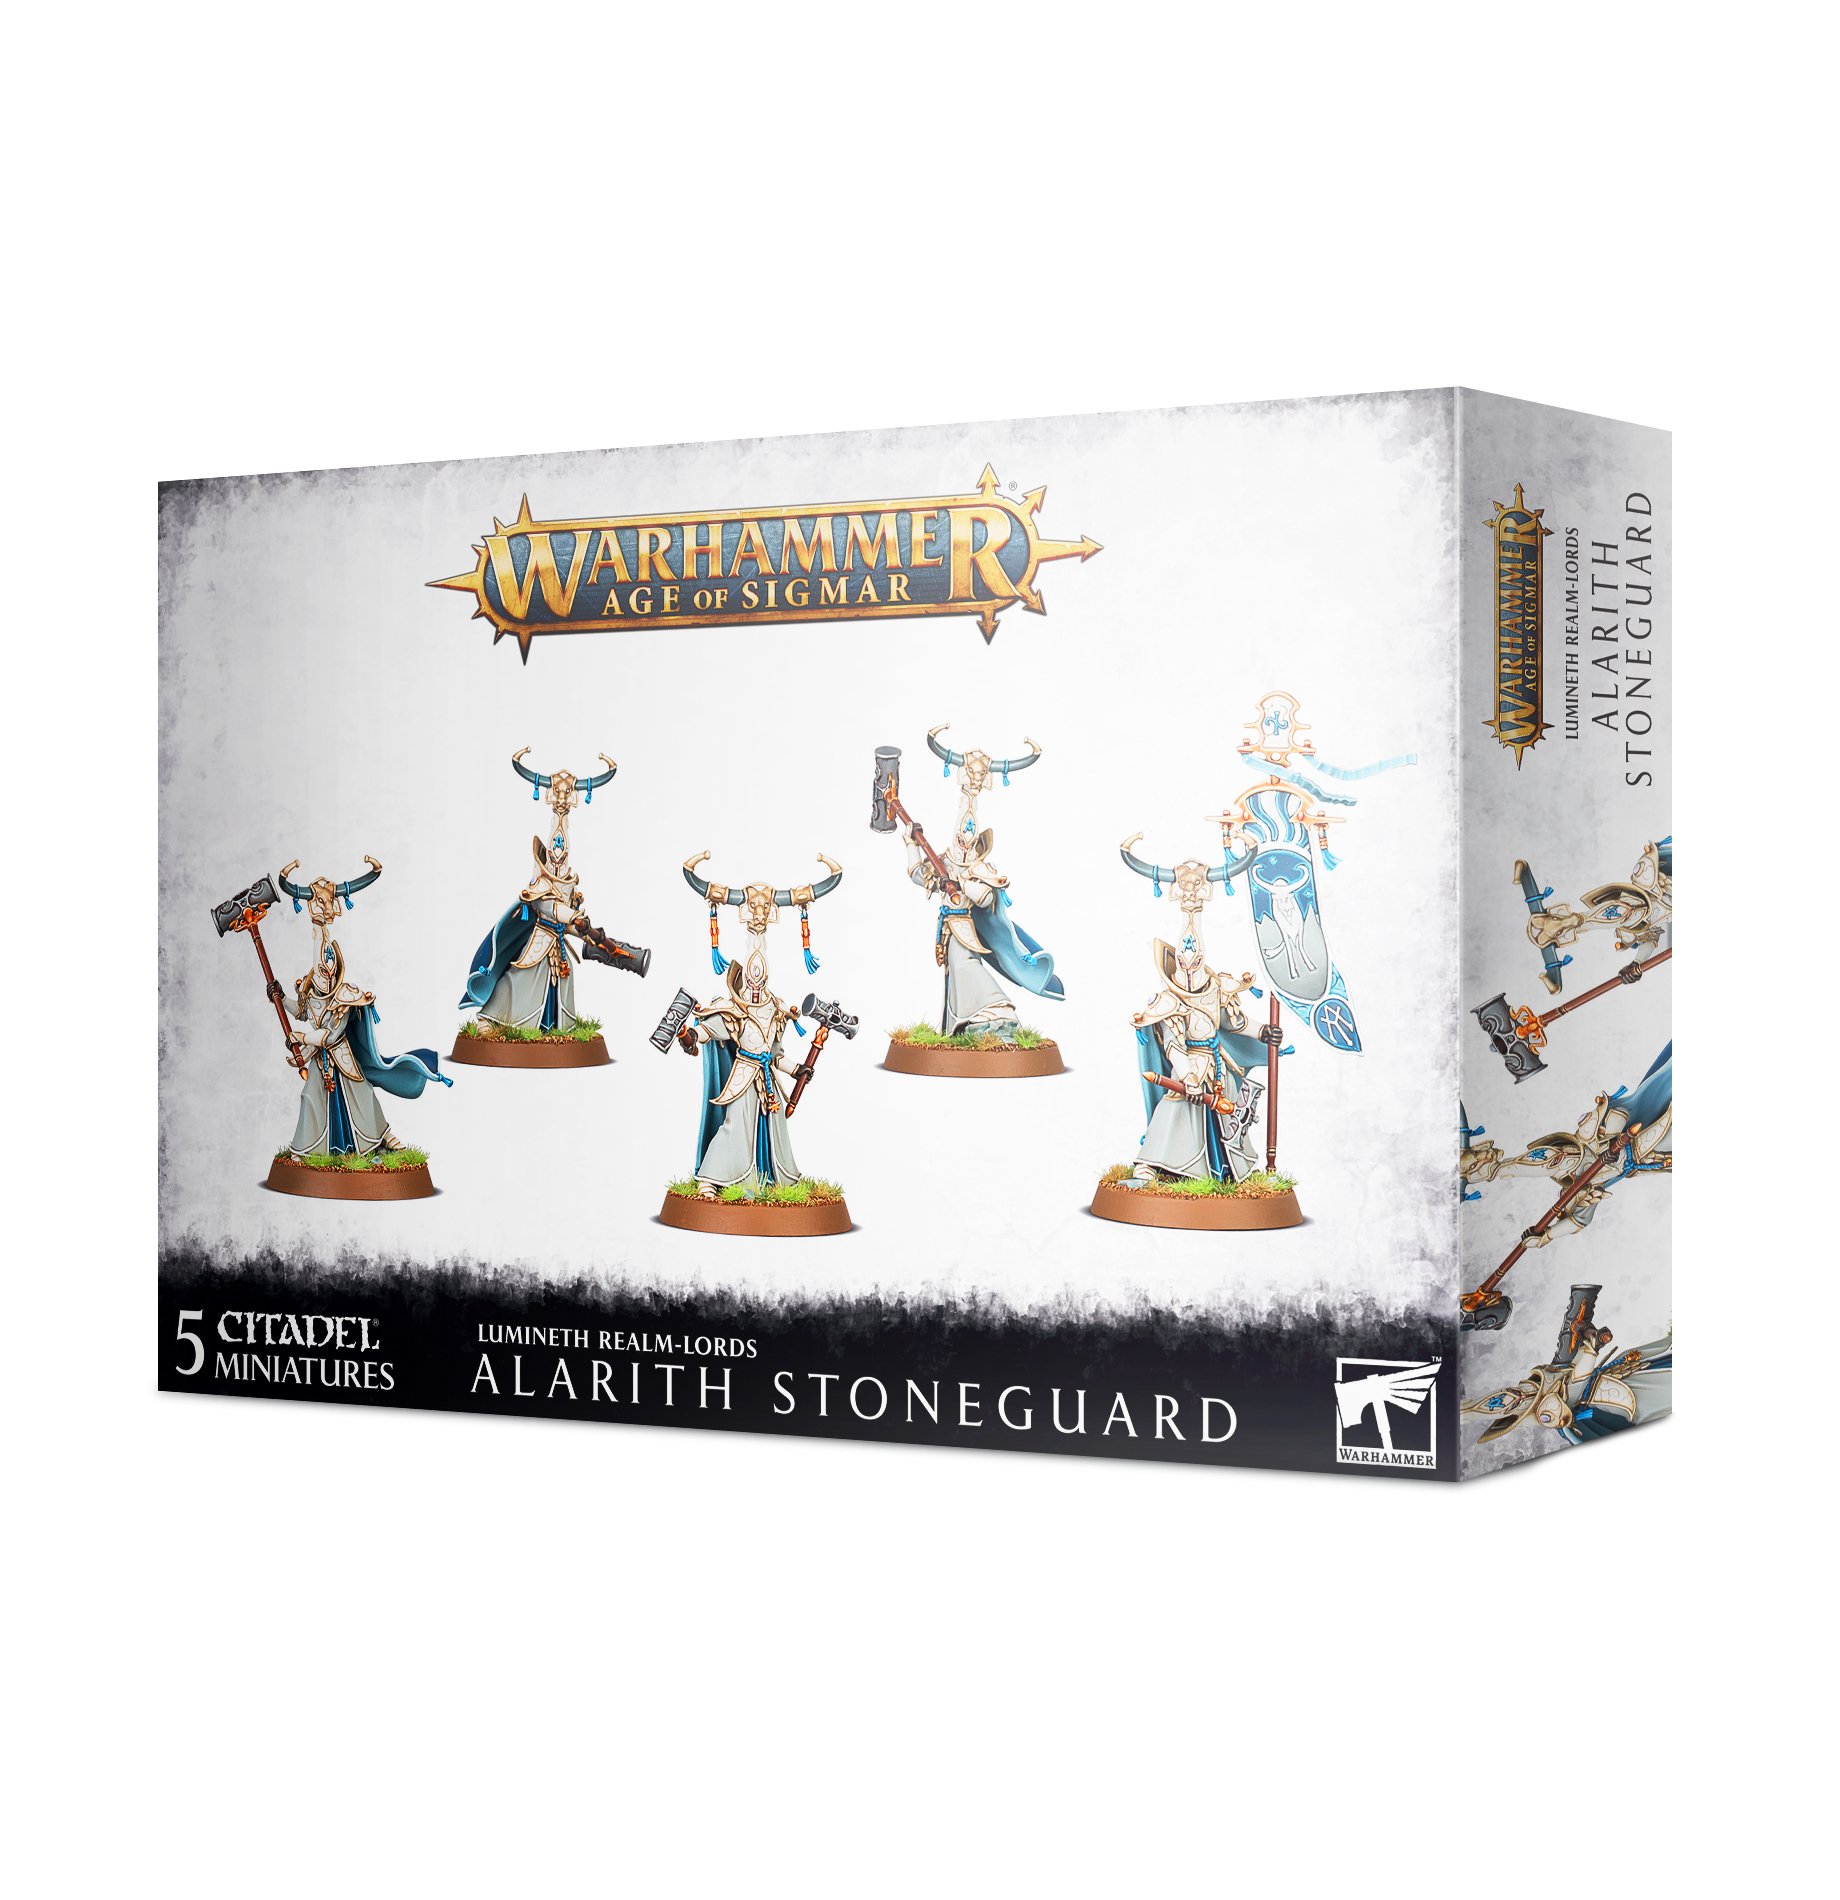 Warhammer Age of Sigmar: Lumineth Realm-lords: Alarith Stoneguard 